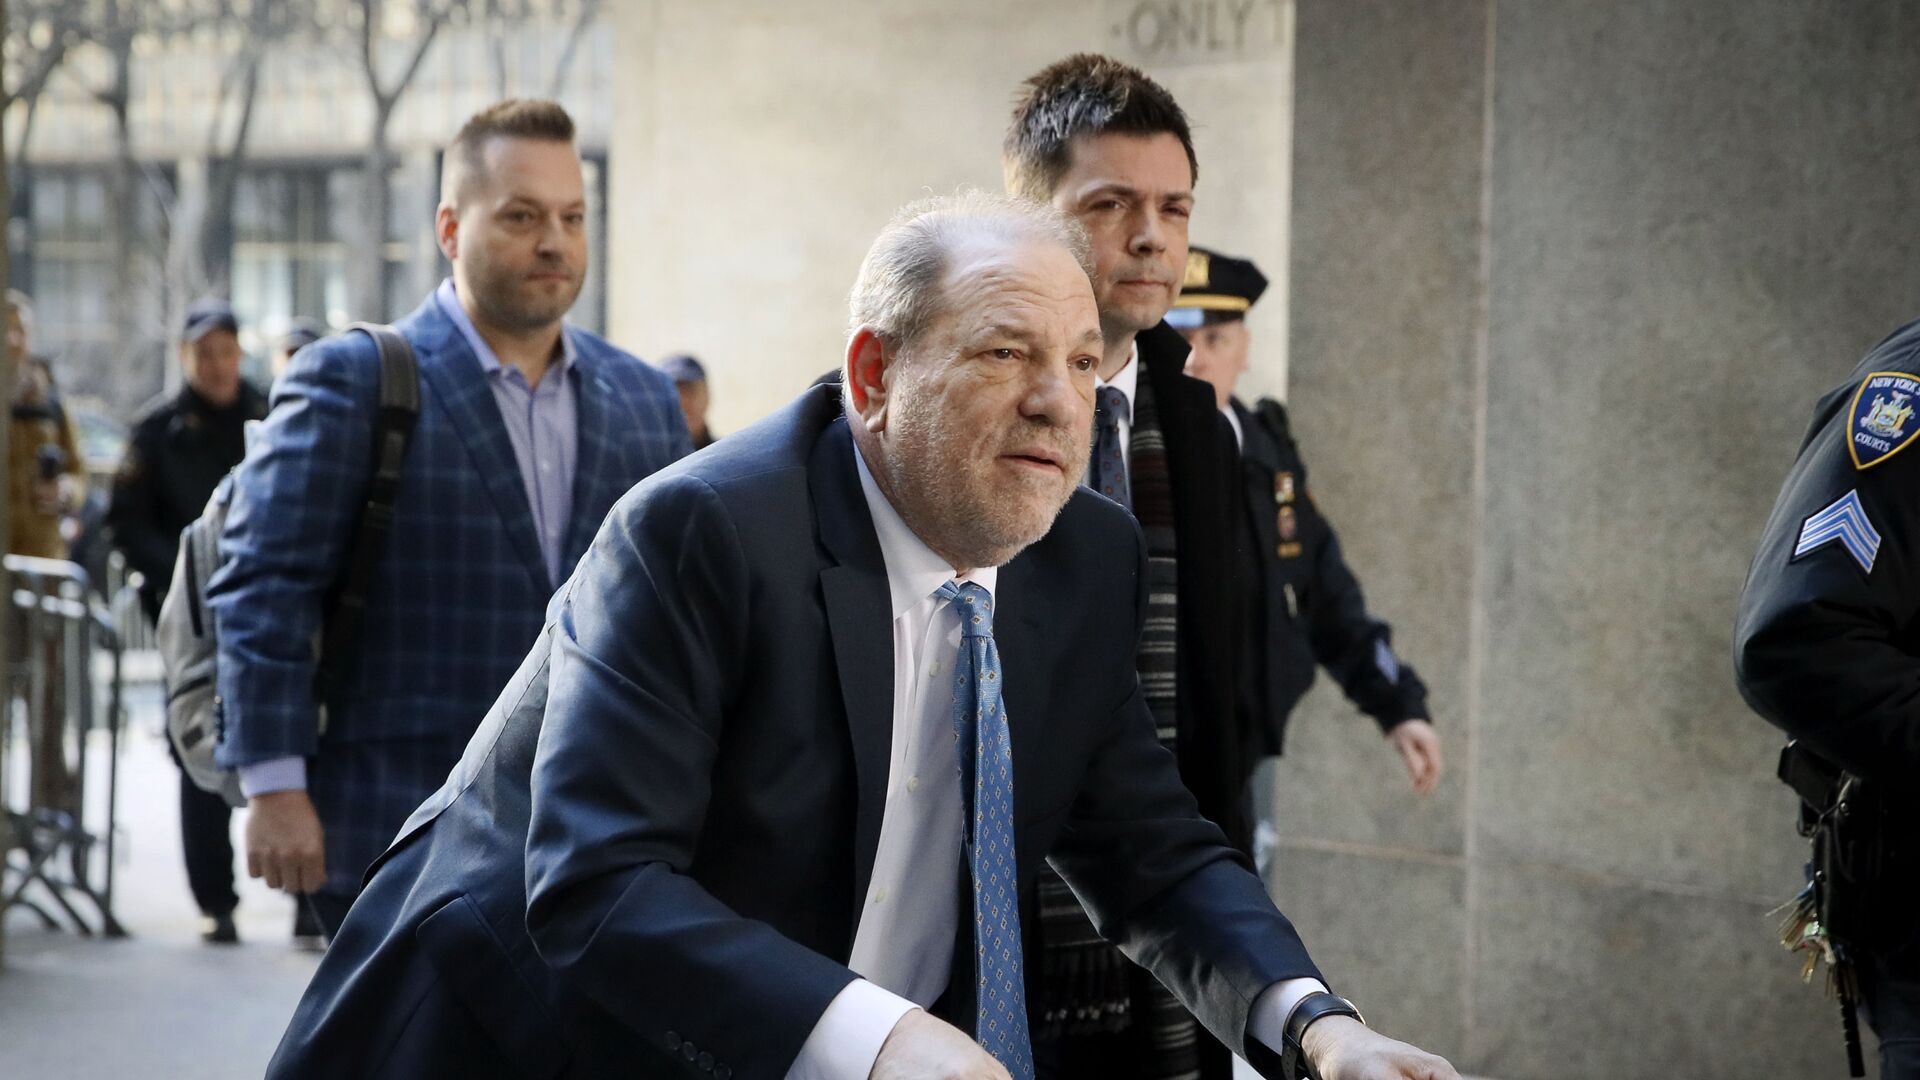 Harvey Weinstein arrives at a Manhattan courthouse as jury deliberations continue in his rape trial, Monday, Feb. 24, 2020, in New York. - Sputnik International, 1920, 06.10.2021